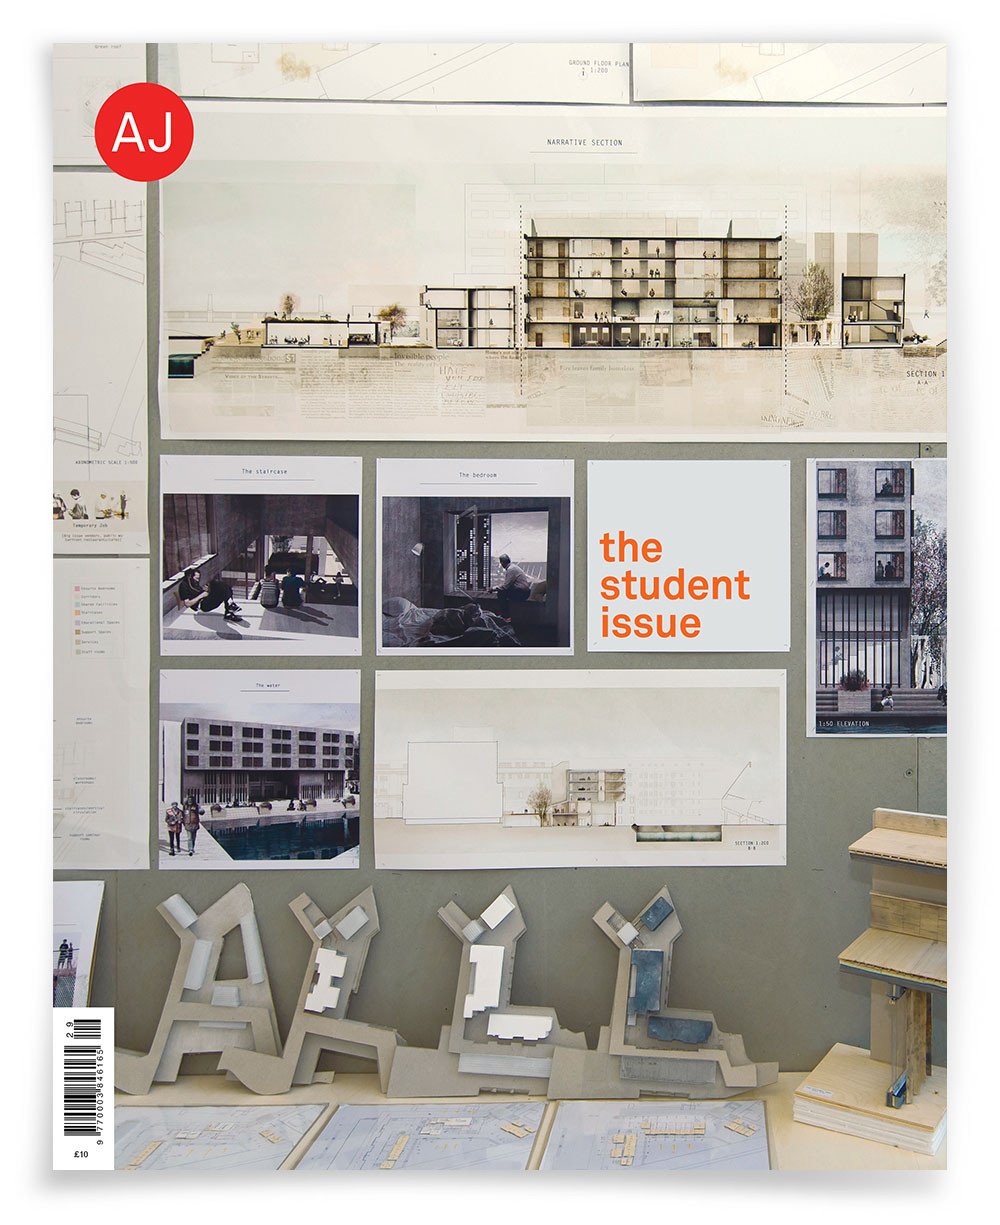 AJ 20.07.17: The Student Issue